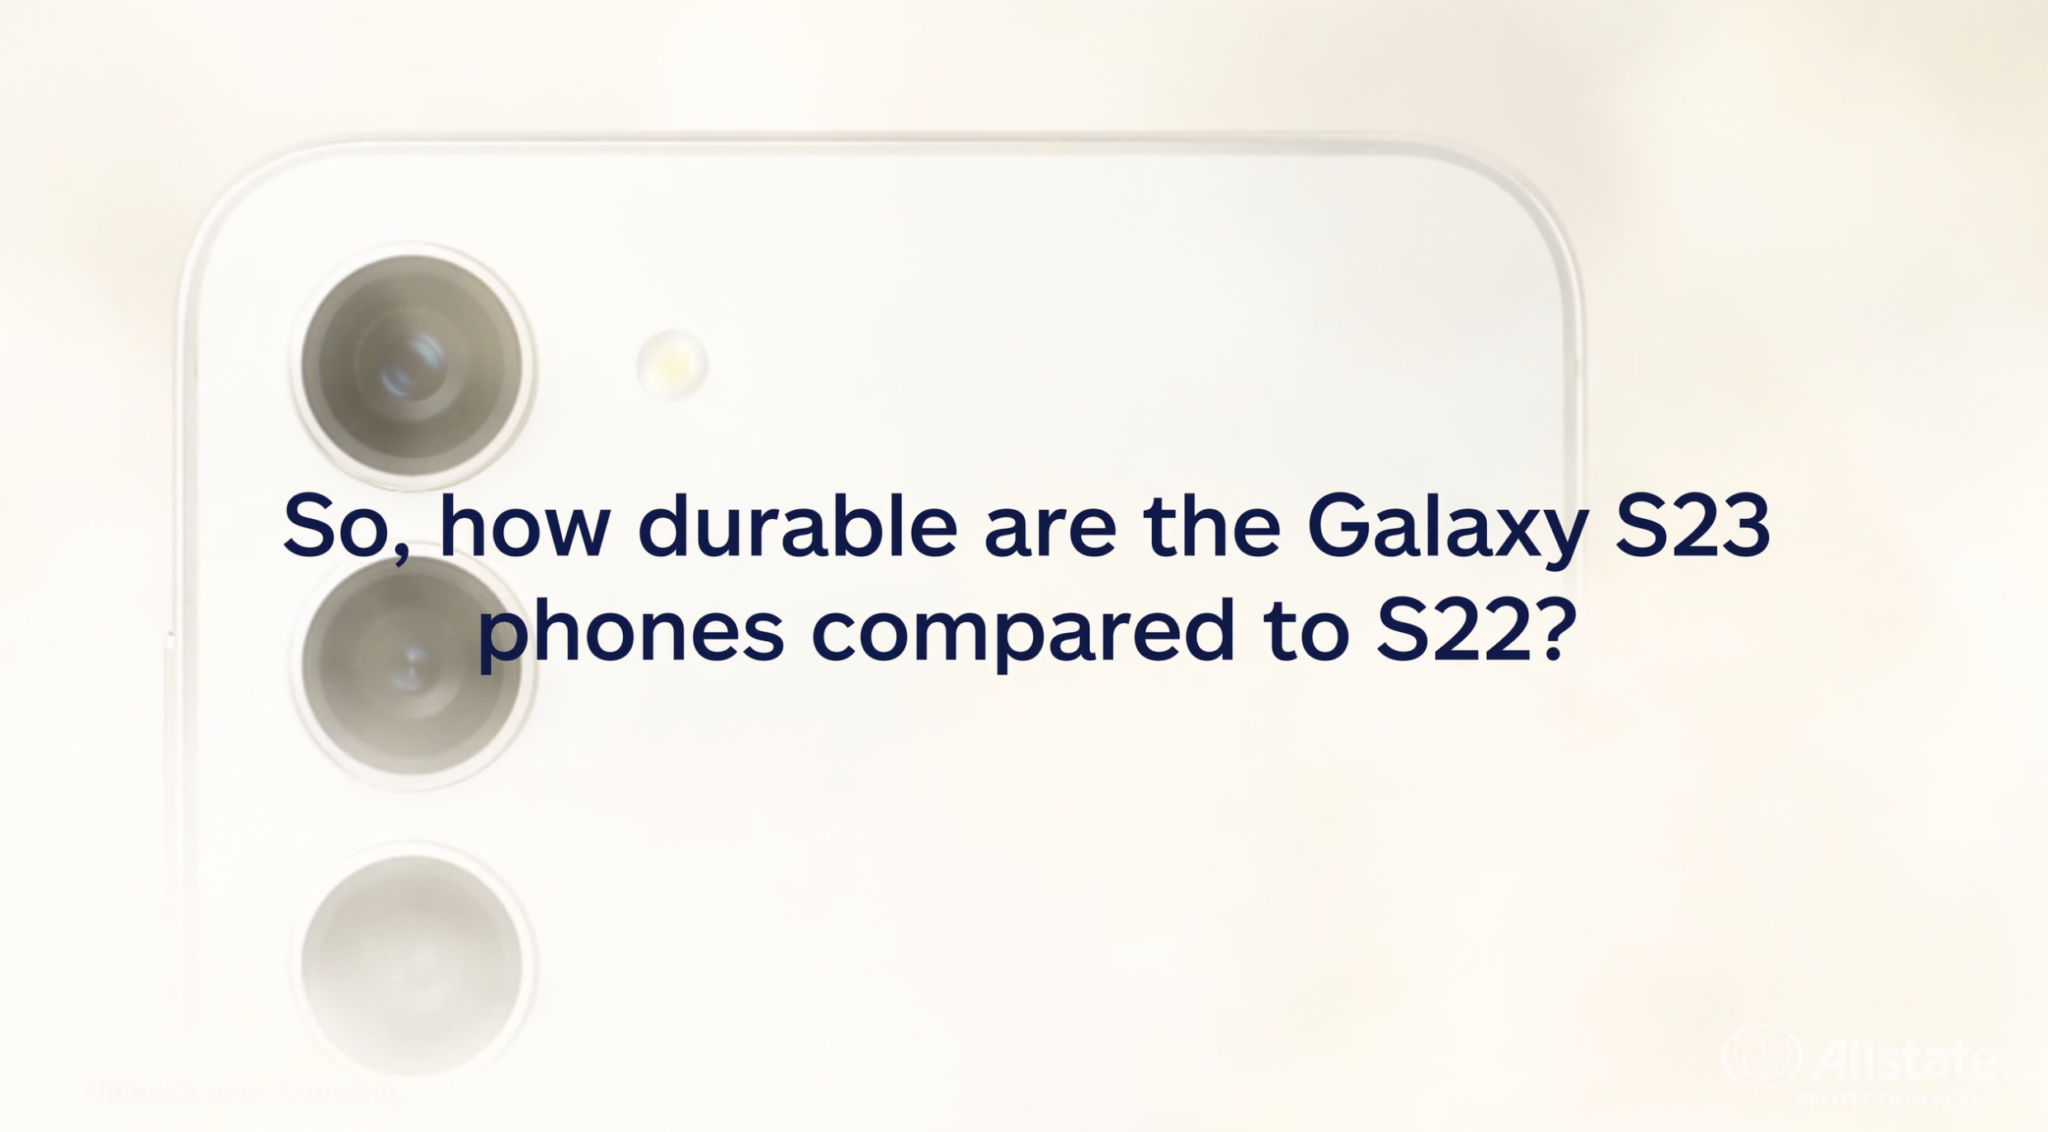 Allstate Protection Plans Explores Whether the More Sustainable Samsung Galaxy S23 Phones Are More Susceptible to Accidental Damage